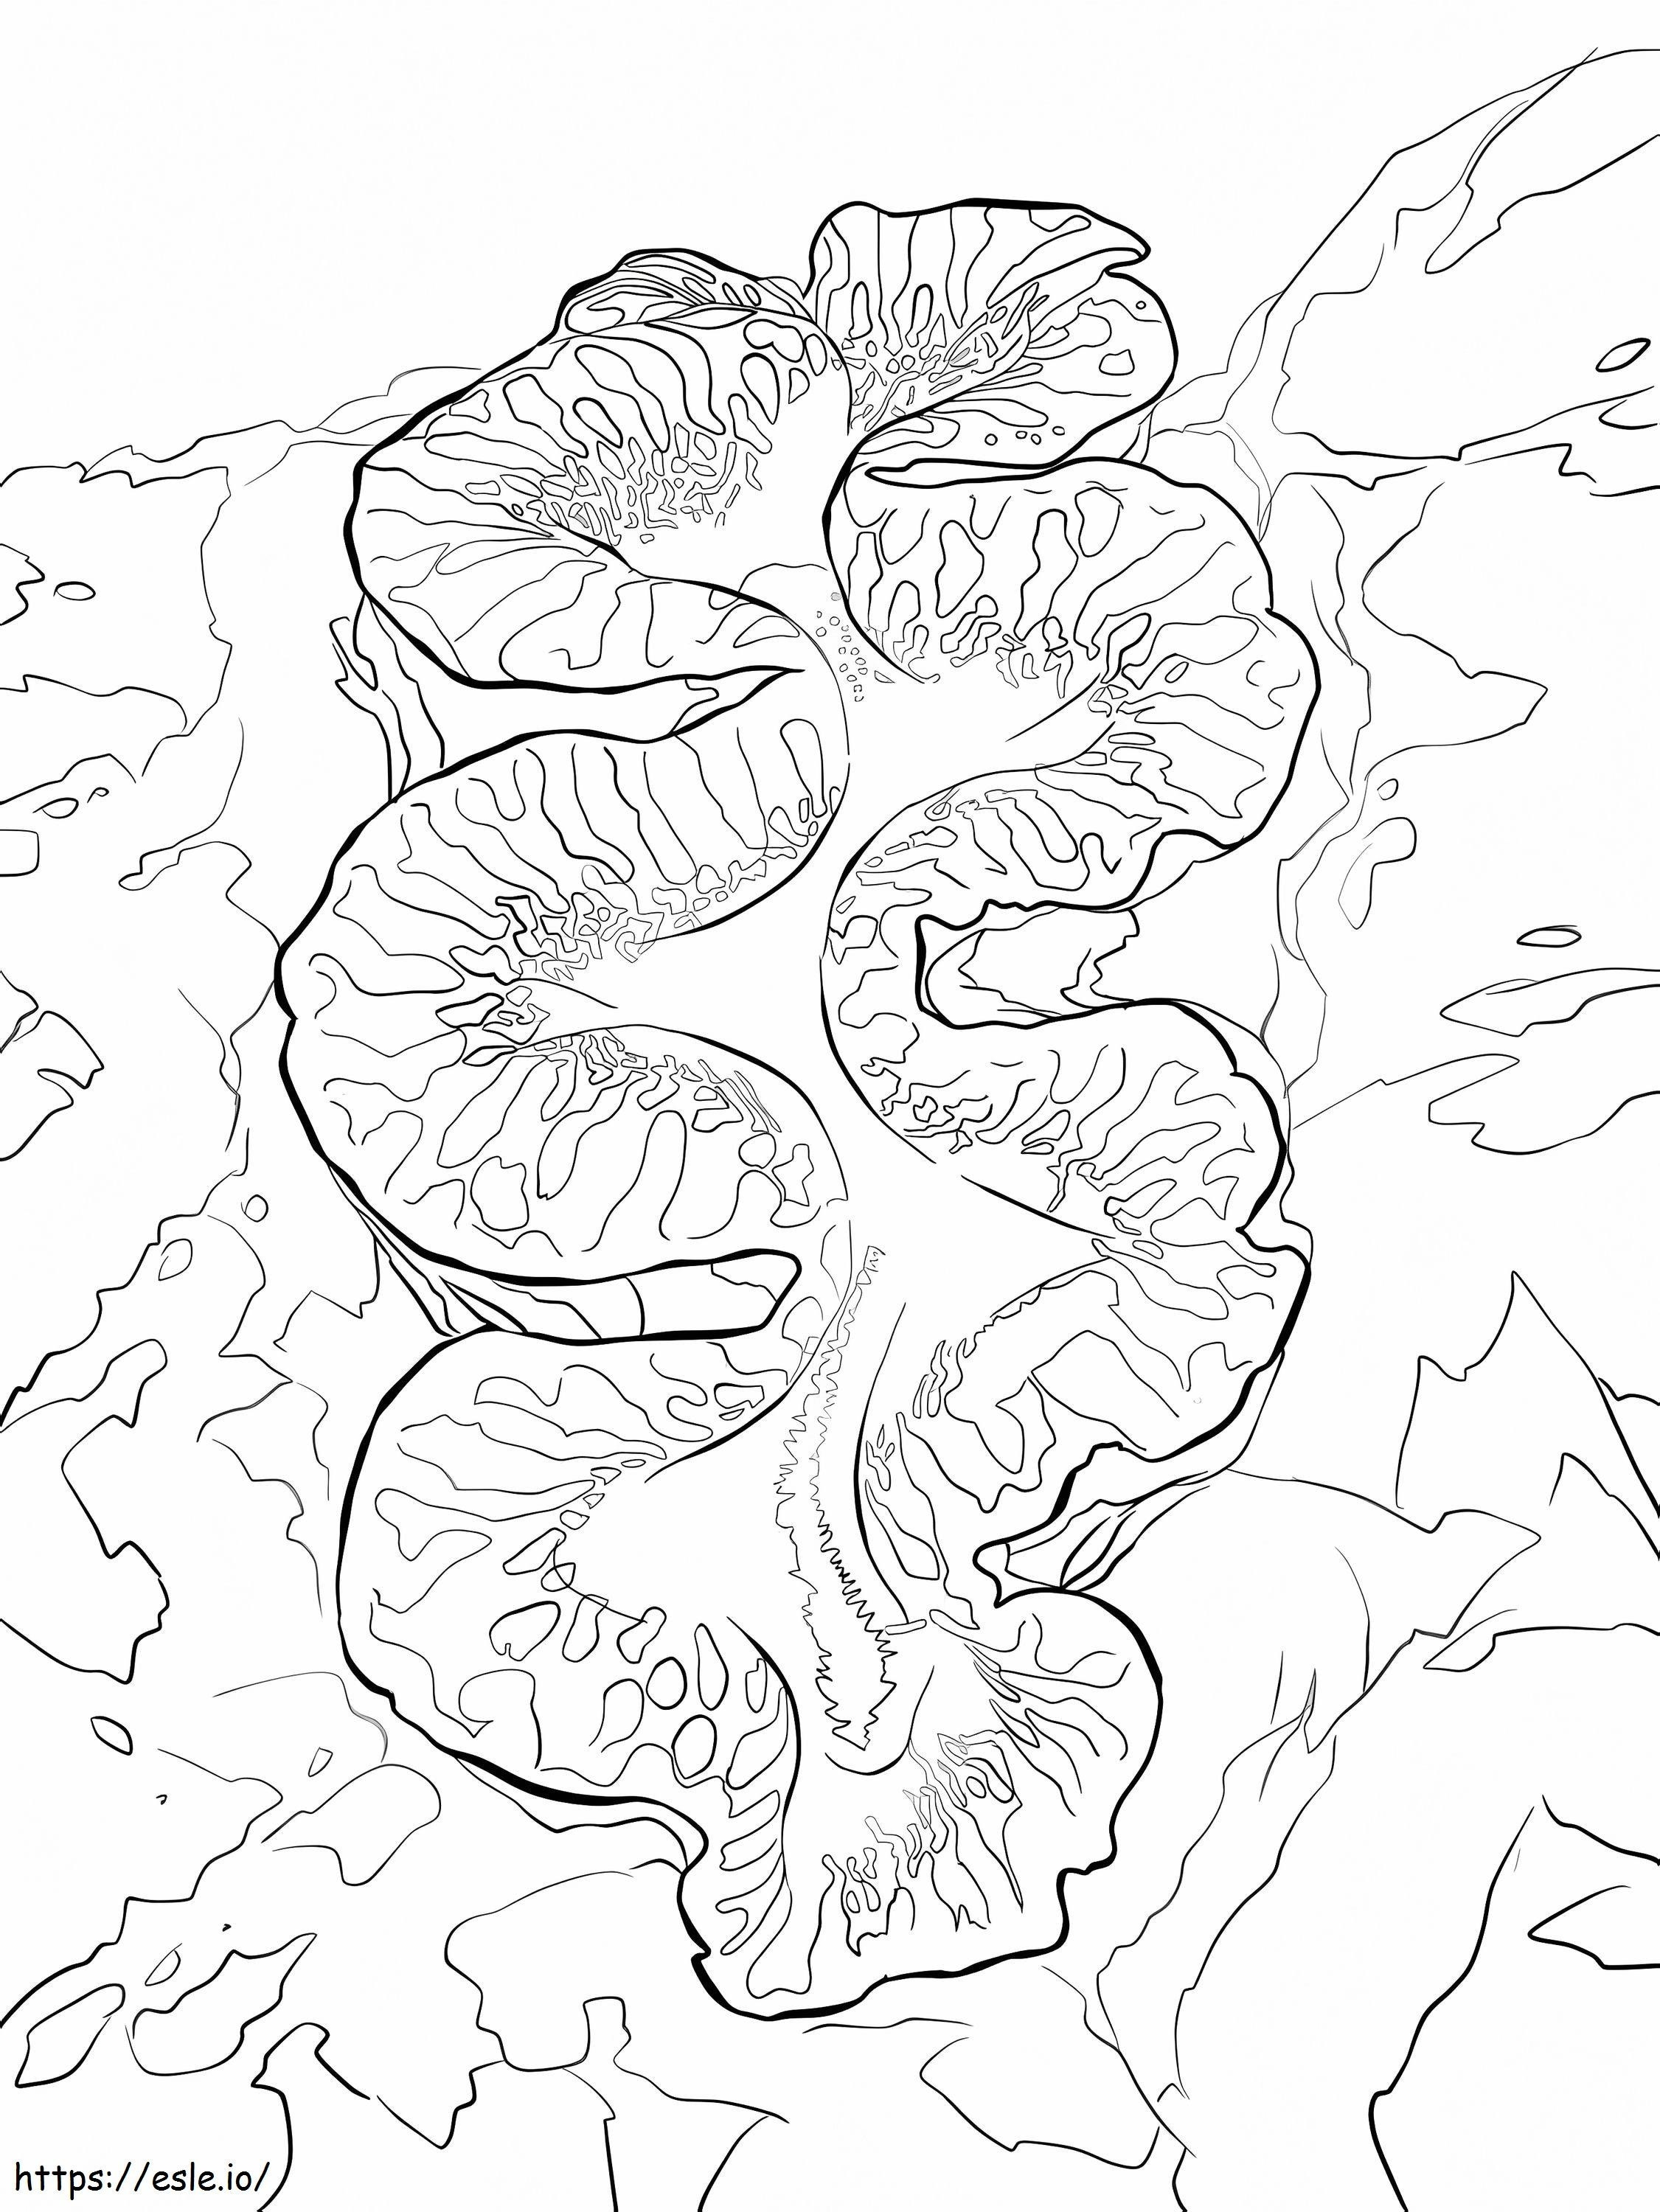 Giant Clam coloring page